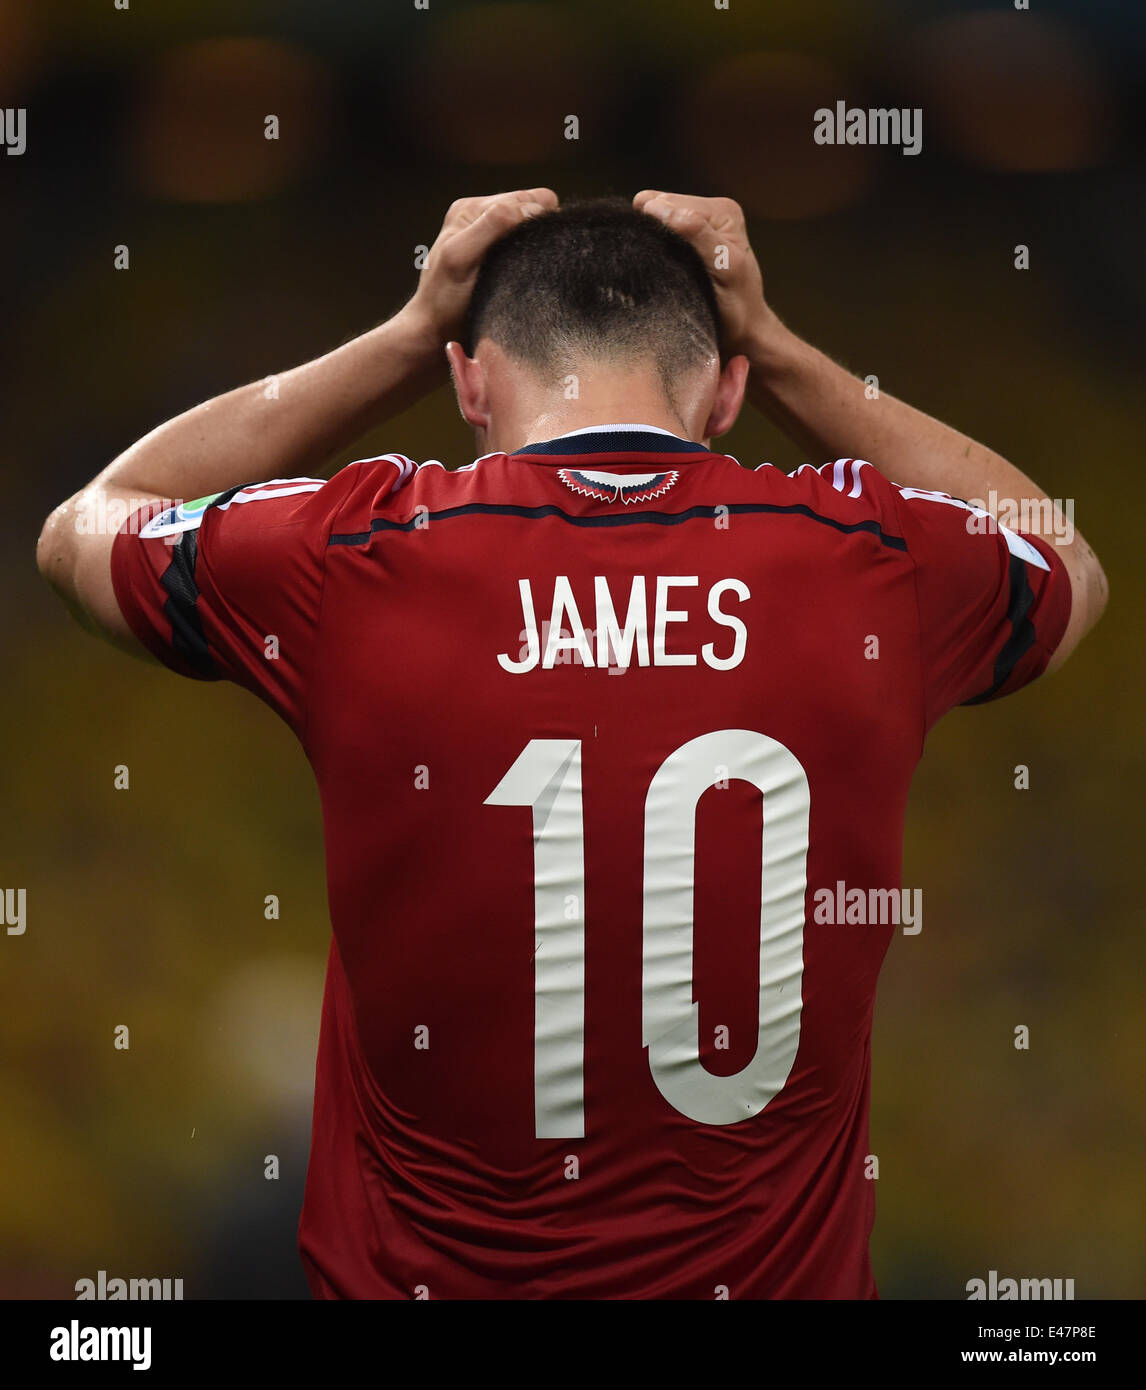 Fortaleza, Brazil. 04th July, 2014. James Rodriguez of Colombia reacts after the FIFA World Cup 2014 quarter final match soccer between Brazil and Colombia at the Estadio Castelao in Fortaleza, Brazil, 04 July 2014. Photo: Marius Becker/dpa/Alamy Live News Stock Photo